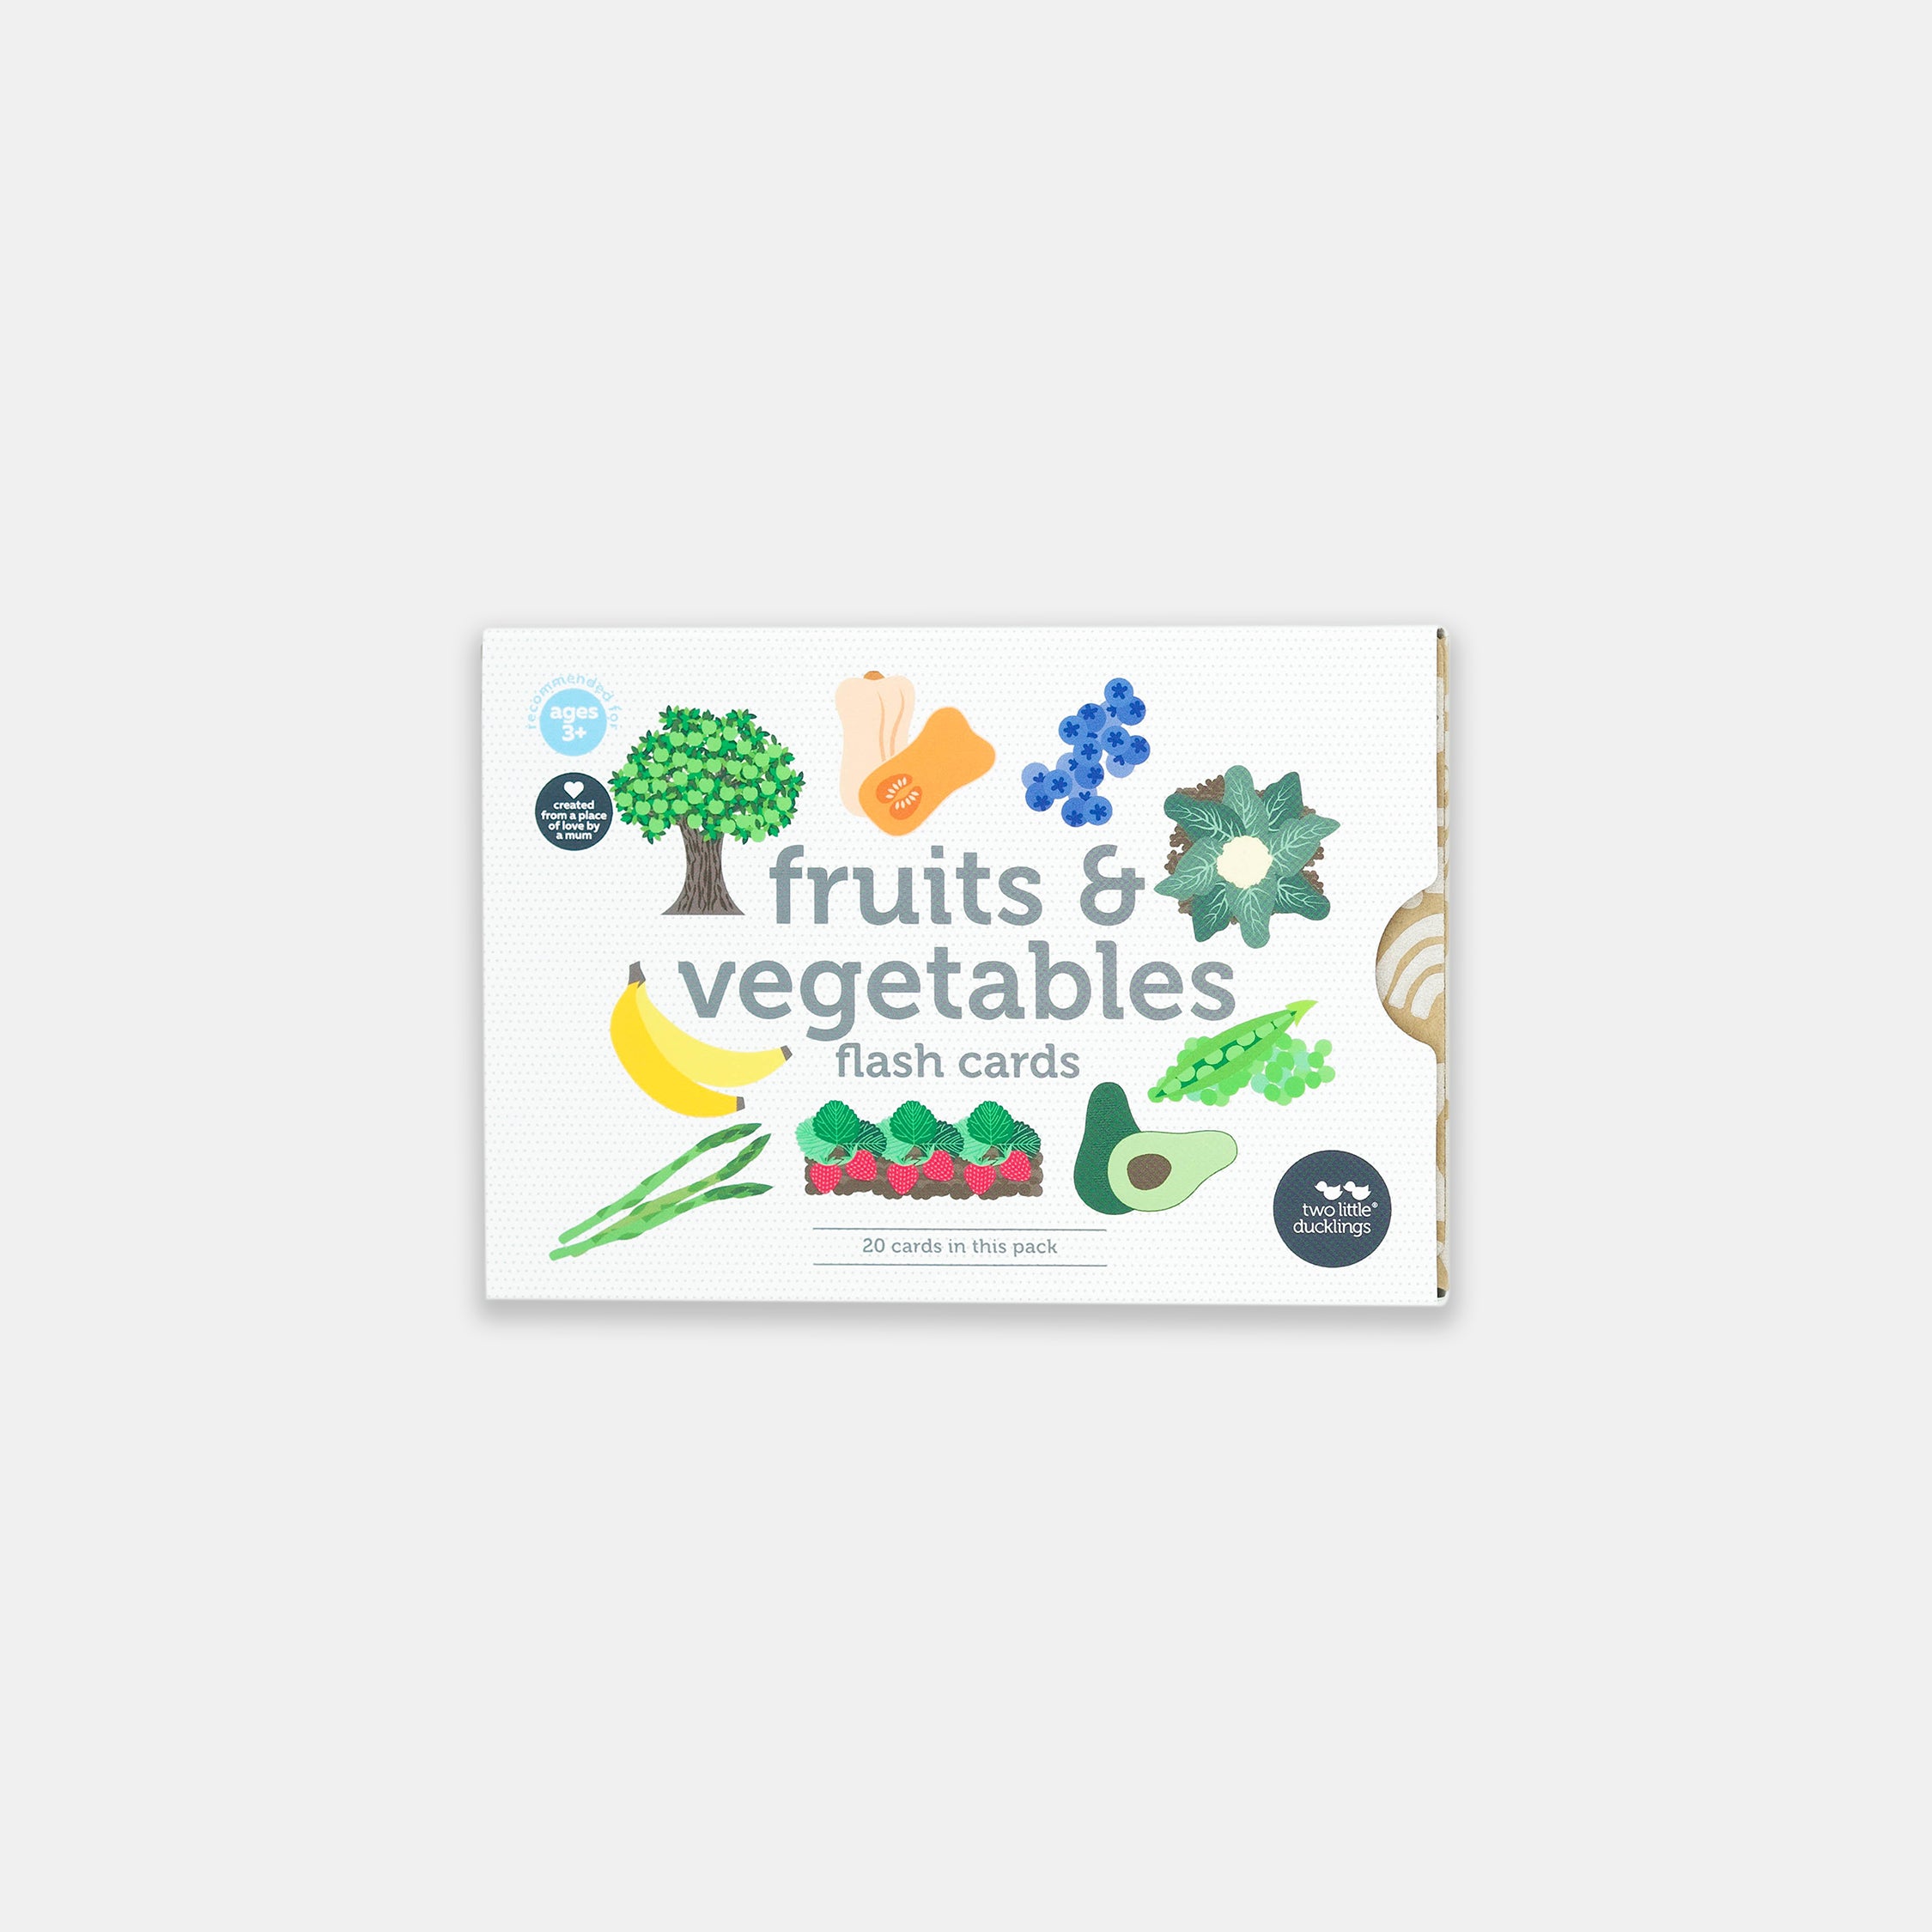 Fruit and Vegetable Flash Cards